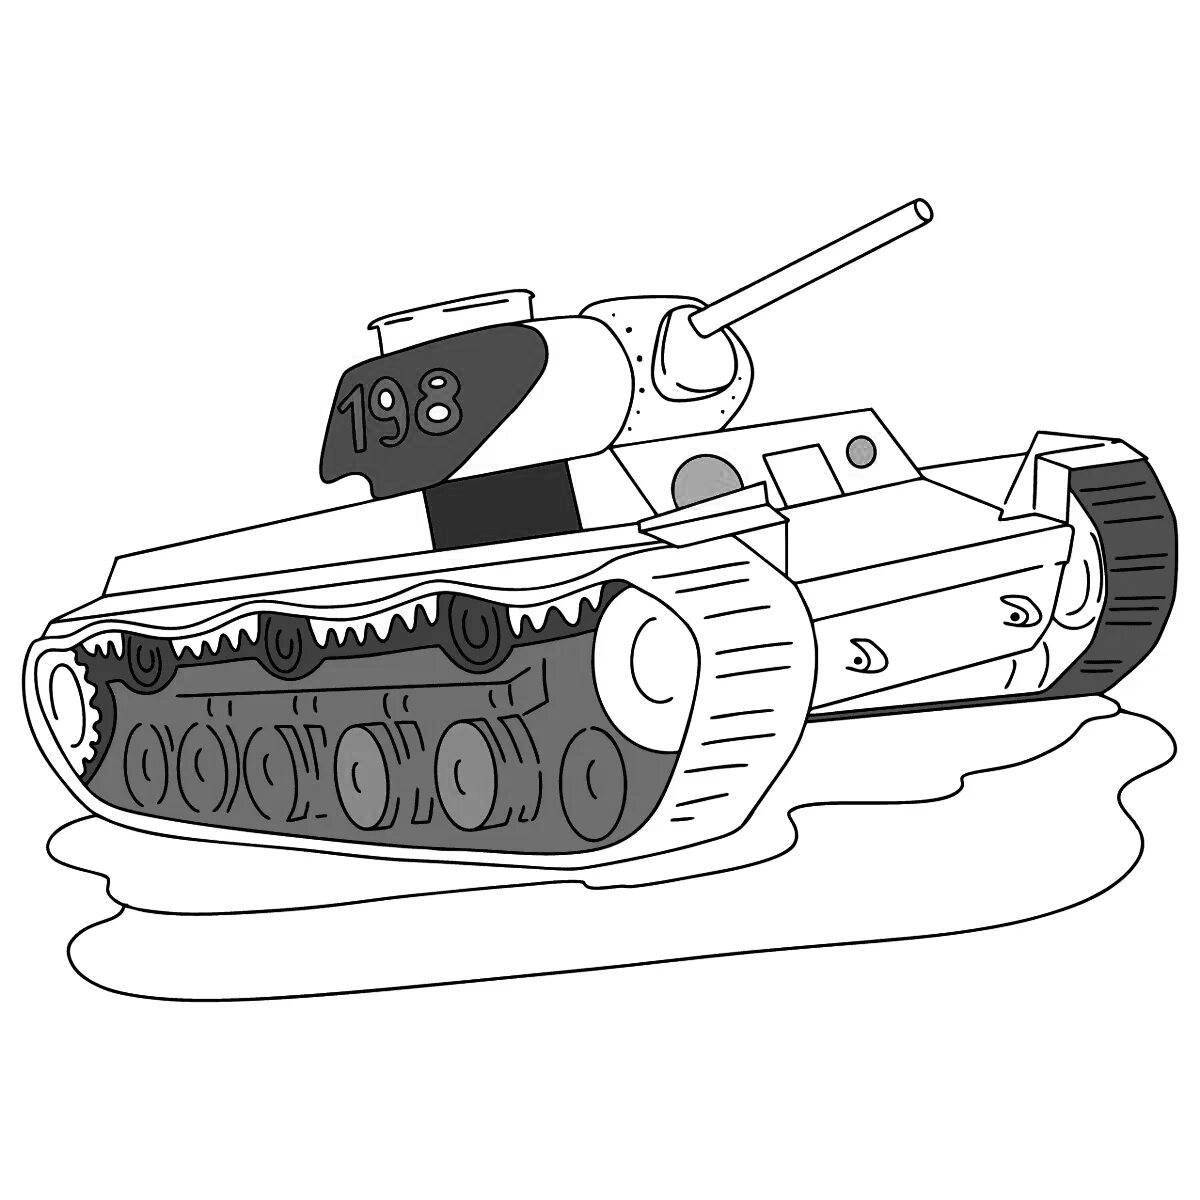 Dazzling cartoon tank coloring book for kids